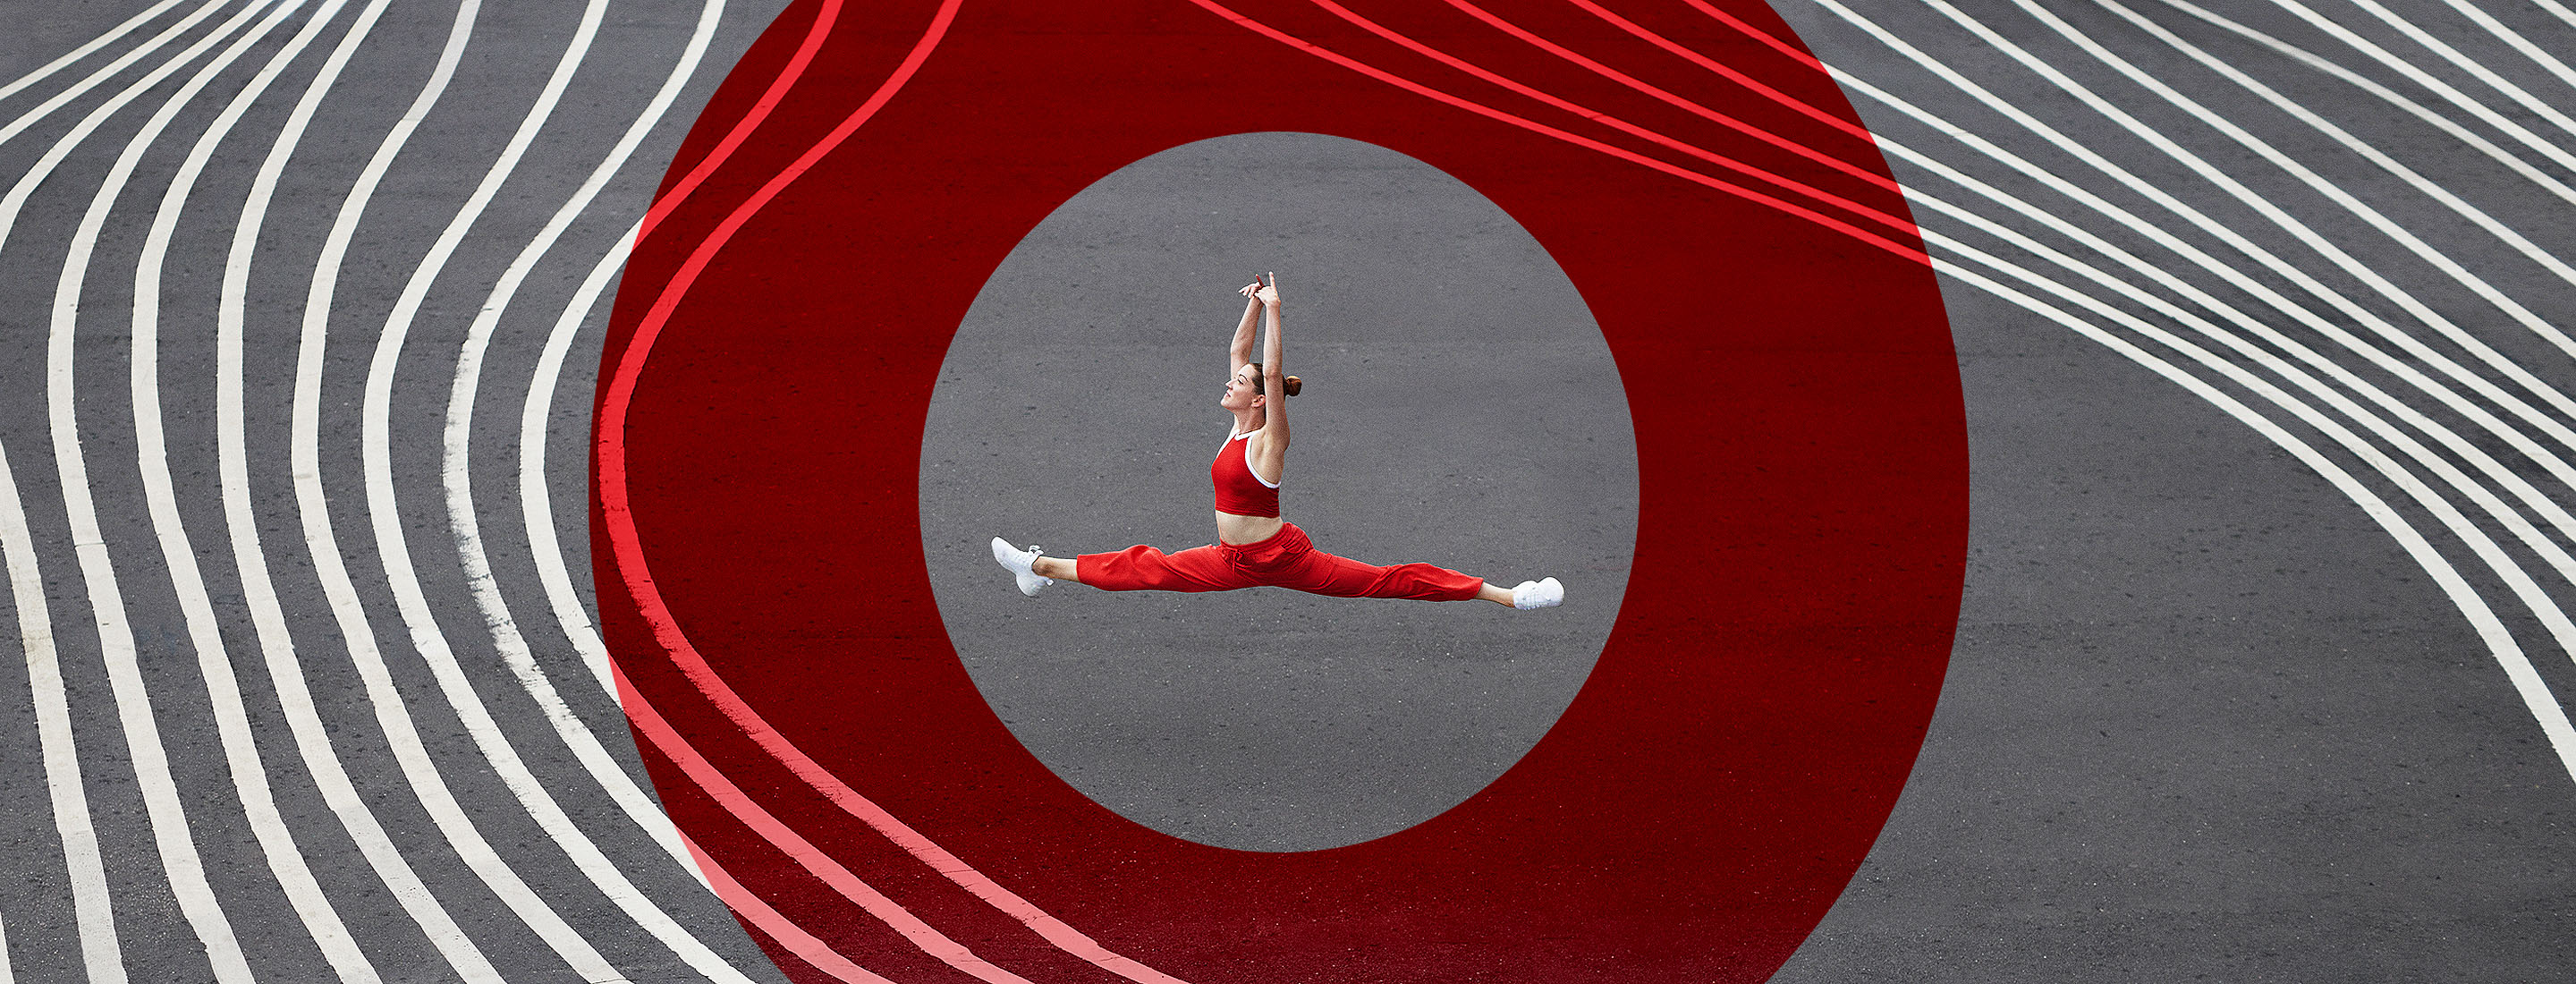 Publicis Sapient logo with woman doing splits in middle